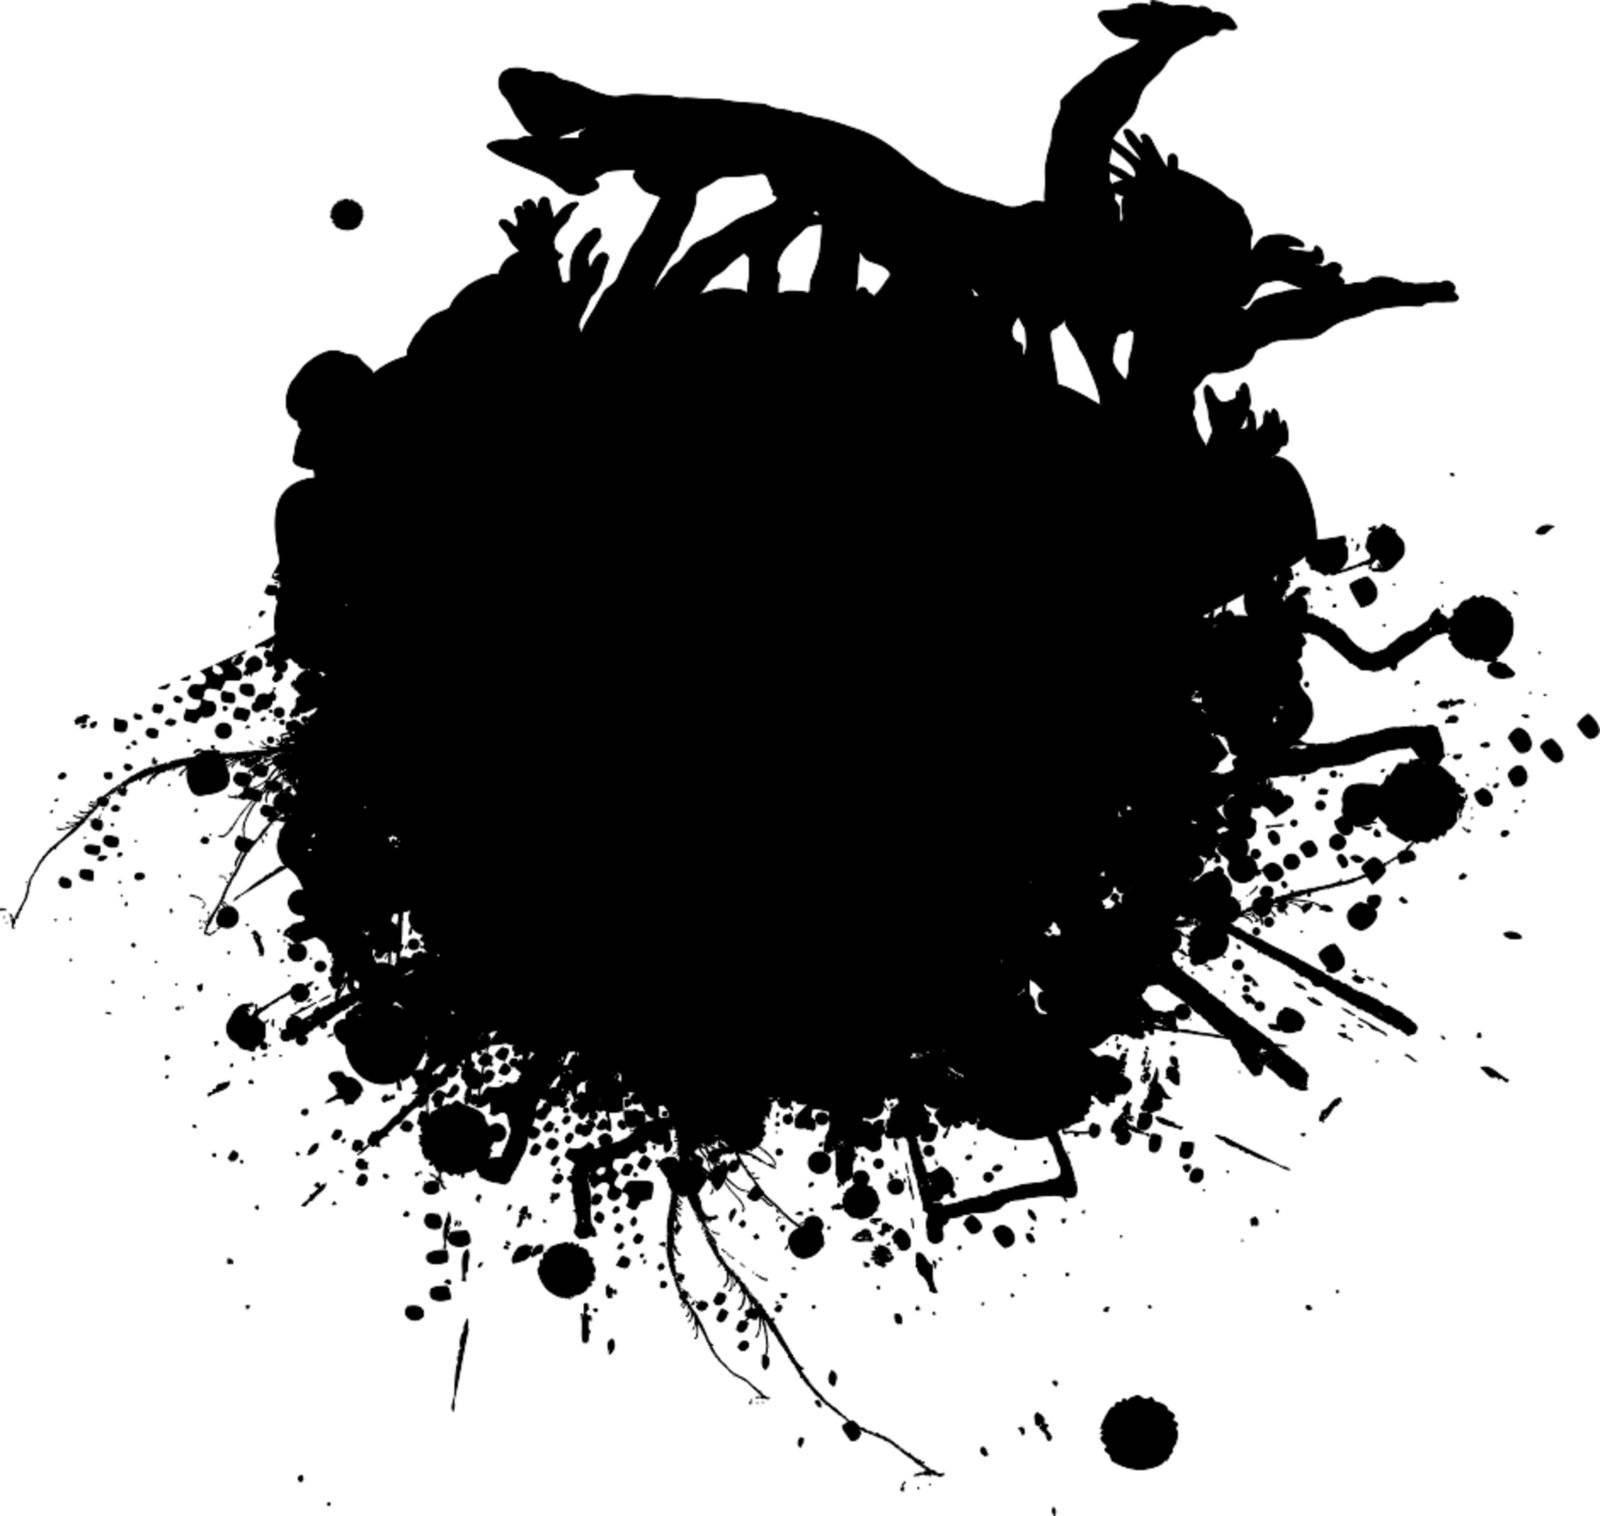 Ink splat with people crowd surfing in black and white